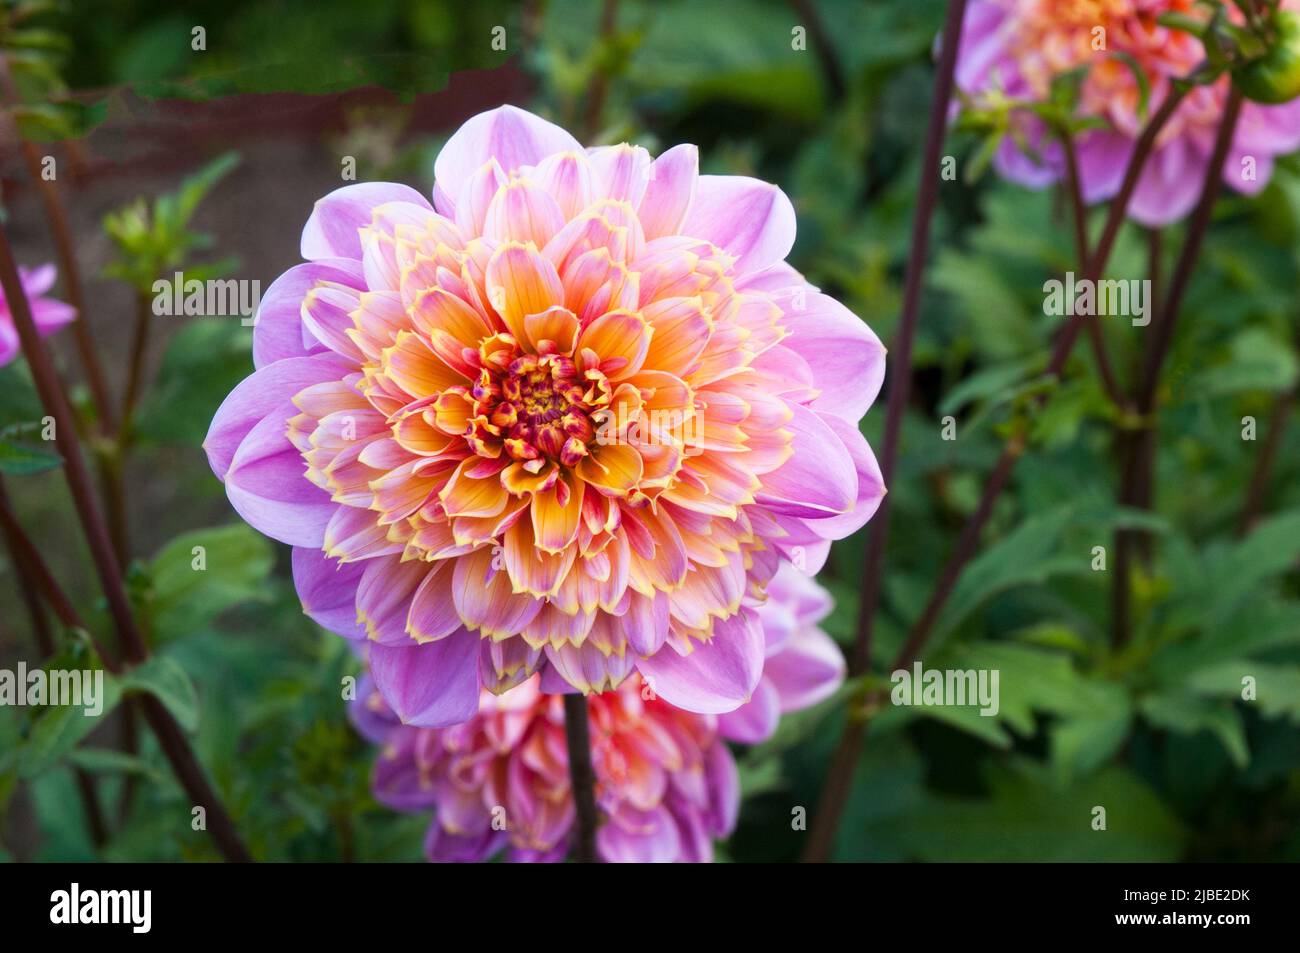 Close up of Dahlia Boogie Woogie a yellow white & pink Anemone flowering dahlia against background of green leaves a frost tender deciduous perennial Stock Photo